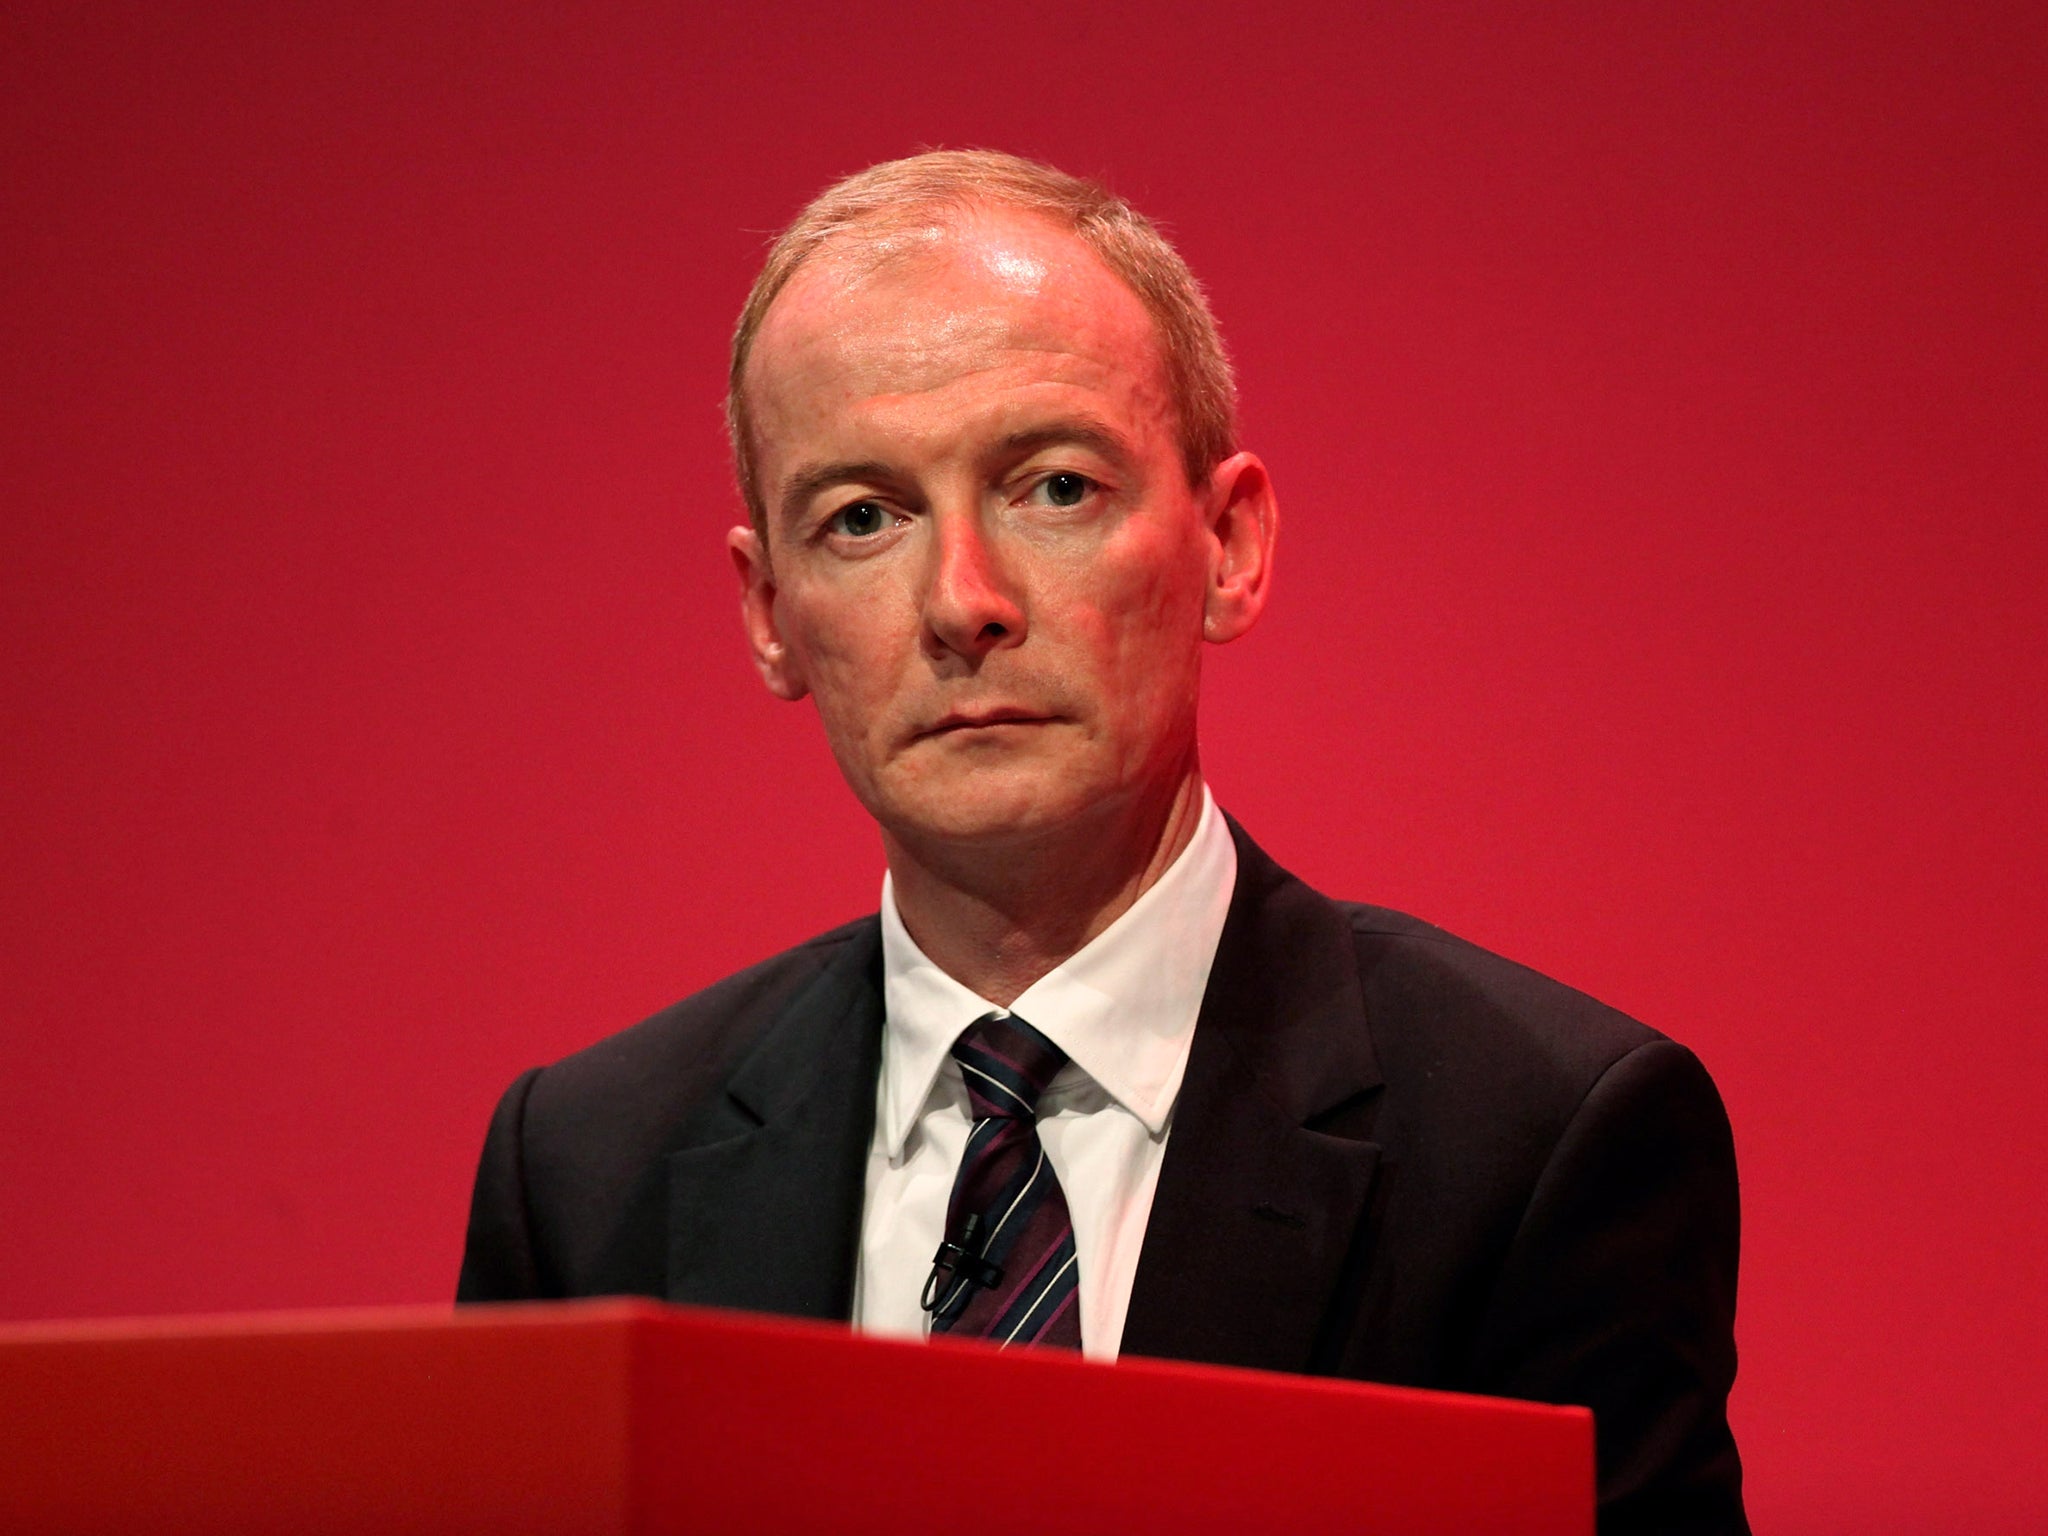 Two ministers resigned over the leadership's treatment of shadow Europe minister Pat McFadden